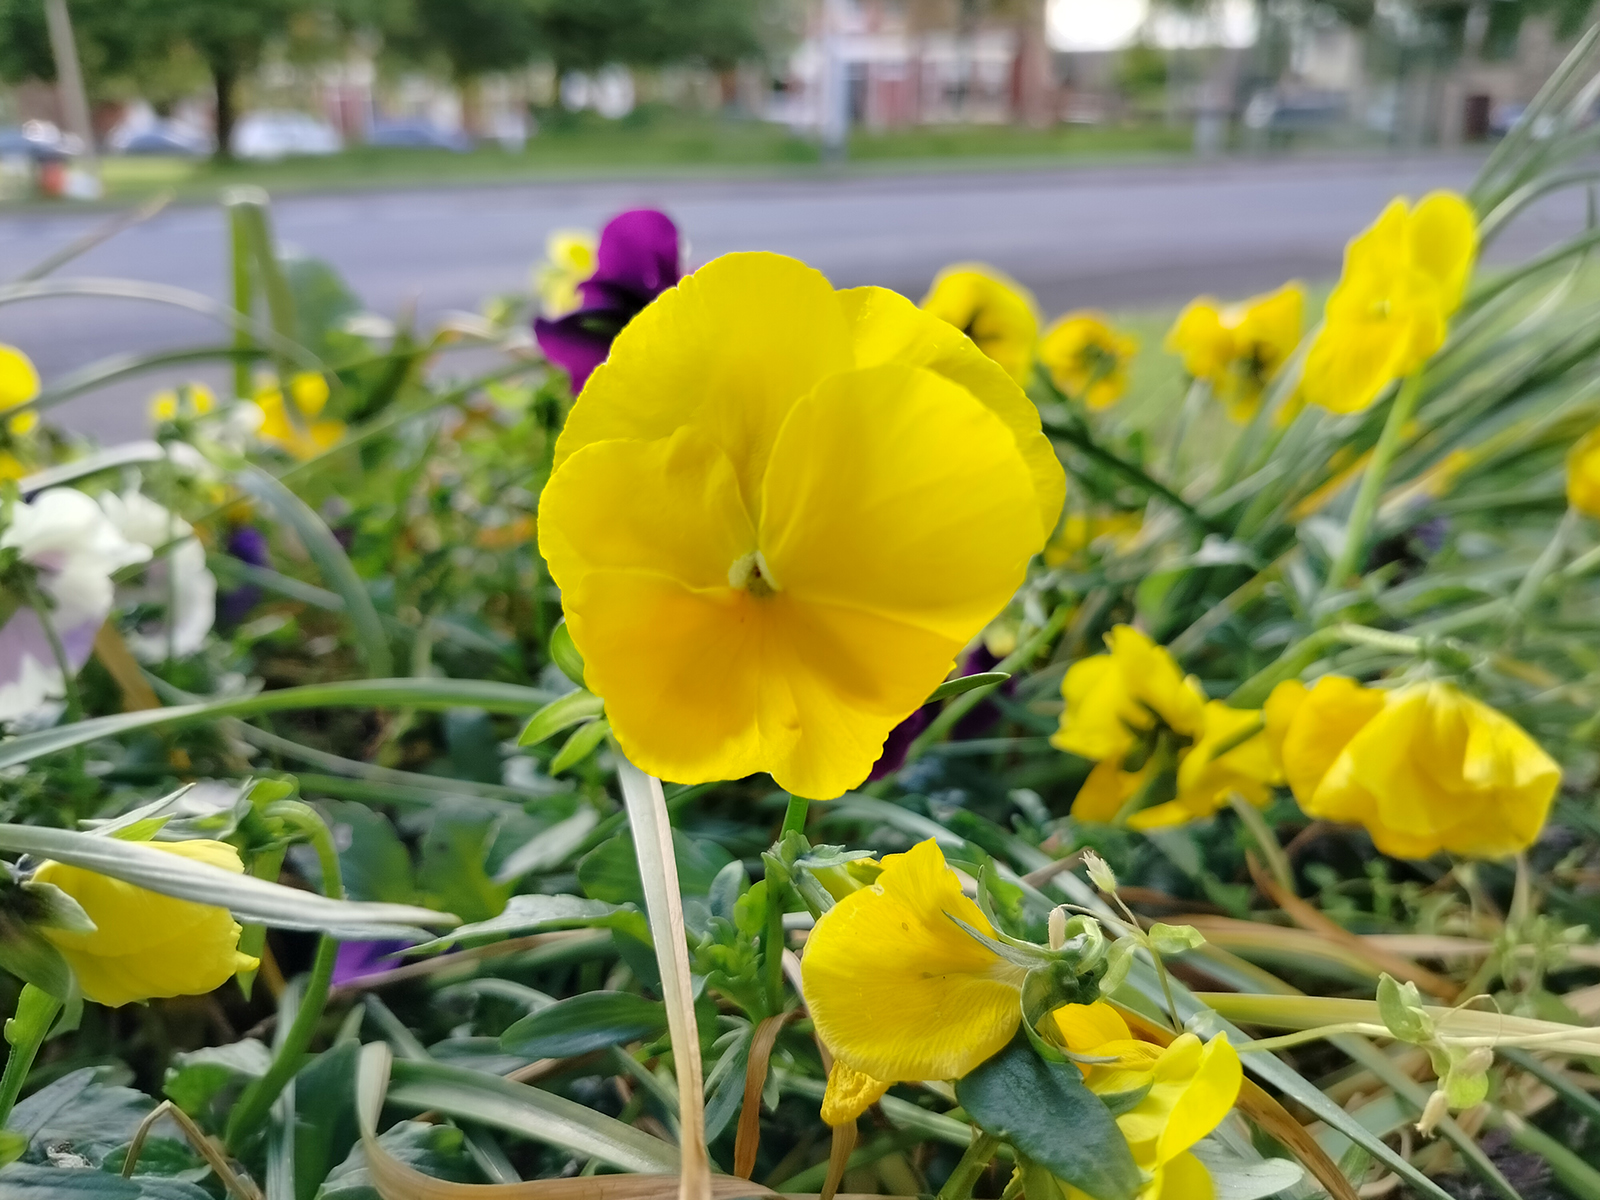 Realme 9 camera sample showing a yellow flower